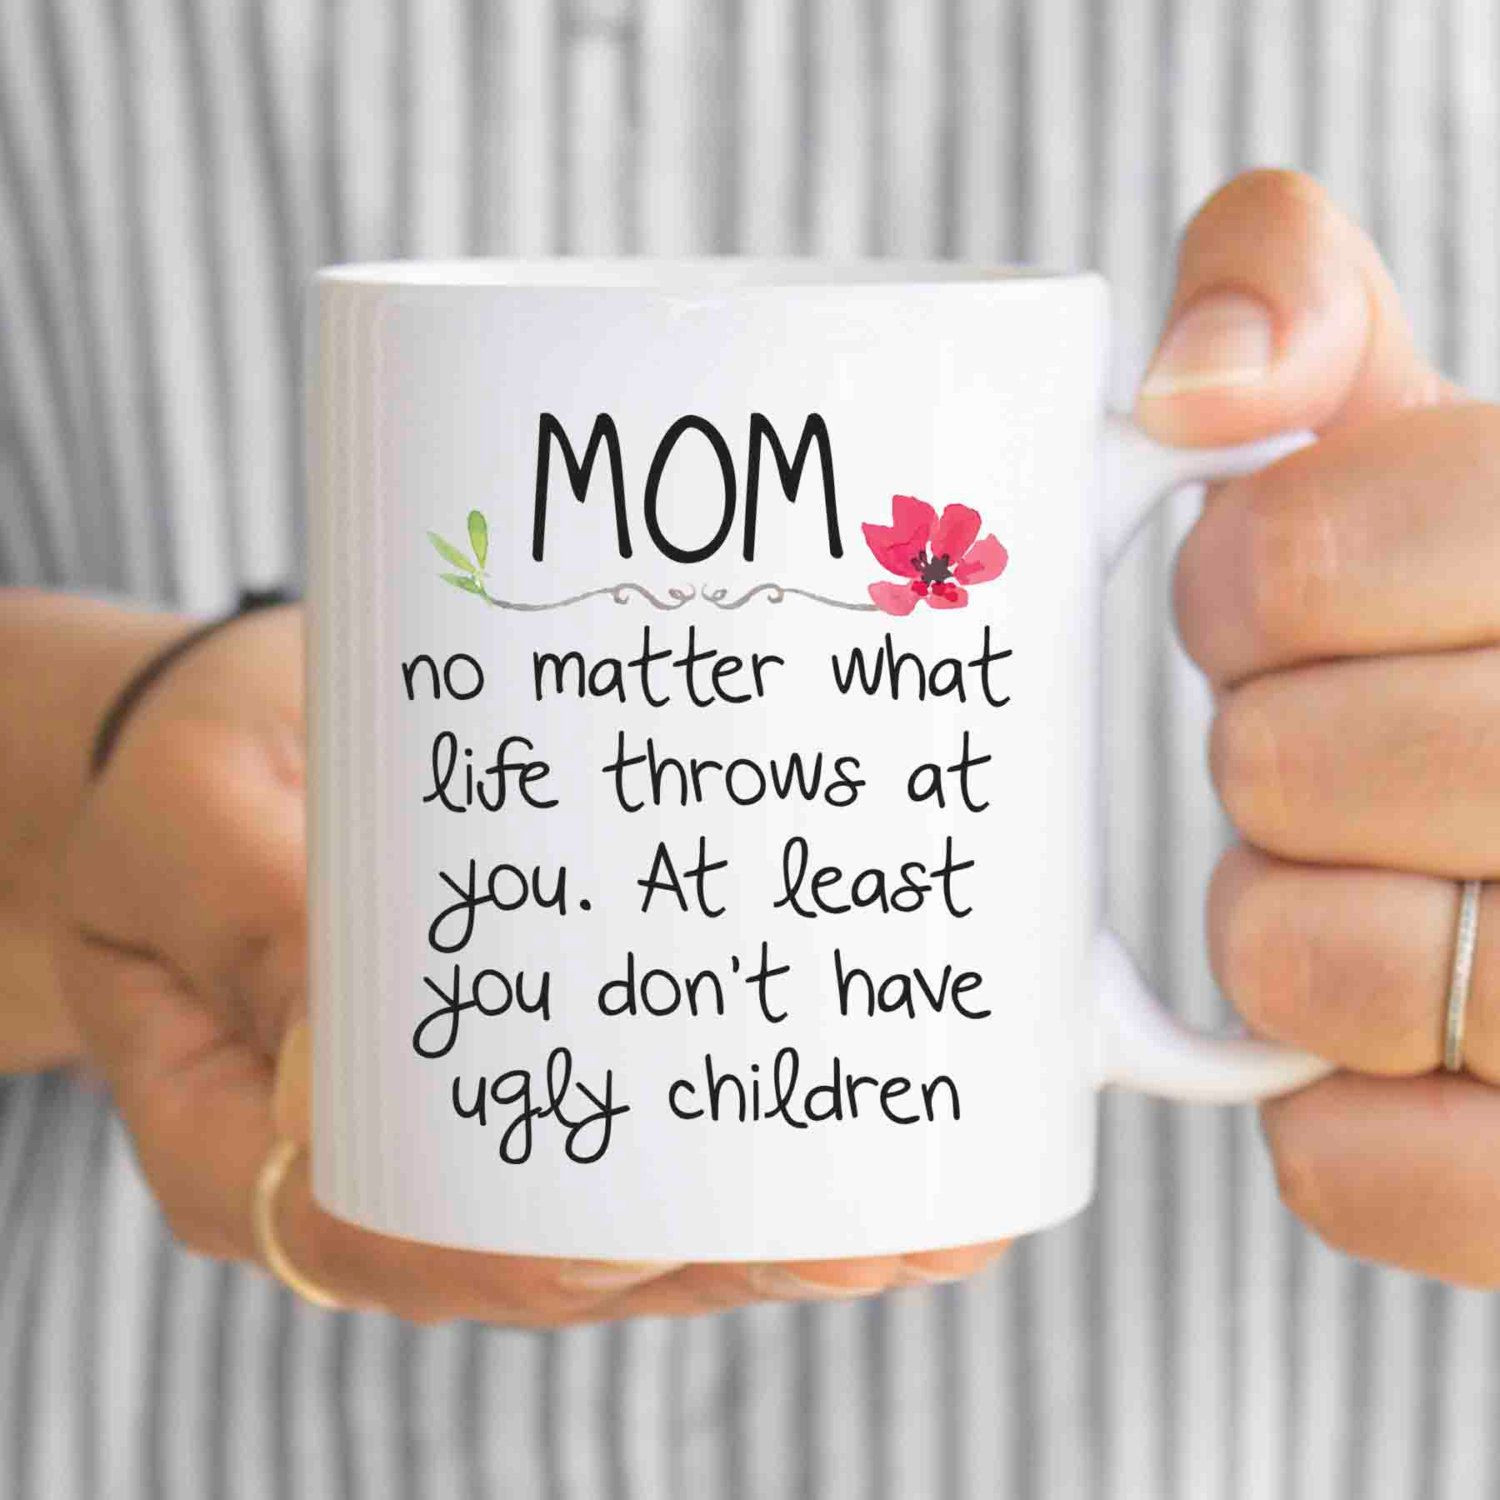 Mothers Day 2019 Gift Ideas
 15 Unique Mother s Day Gifts Ideas 2019 For Mom – Best